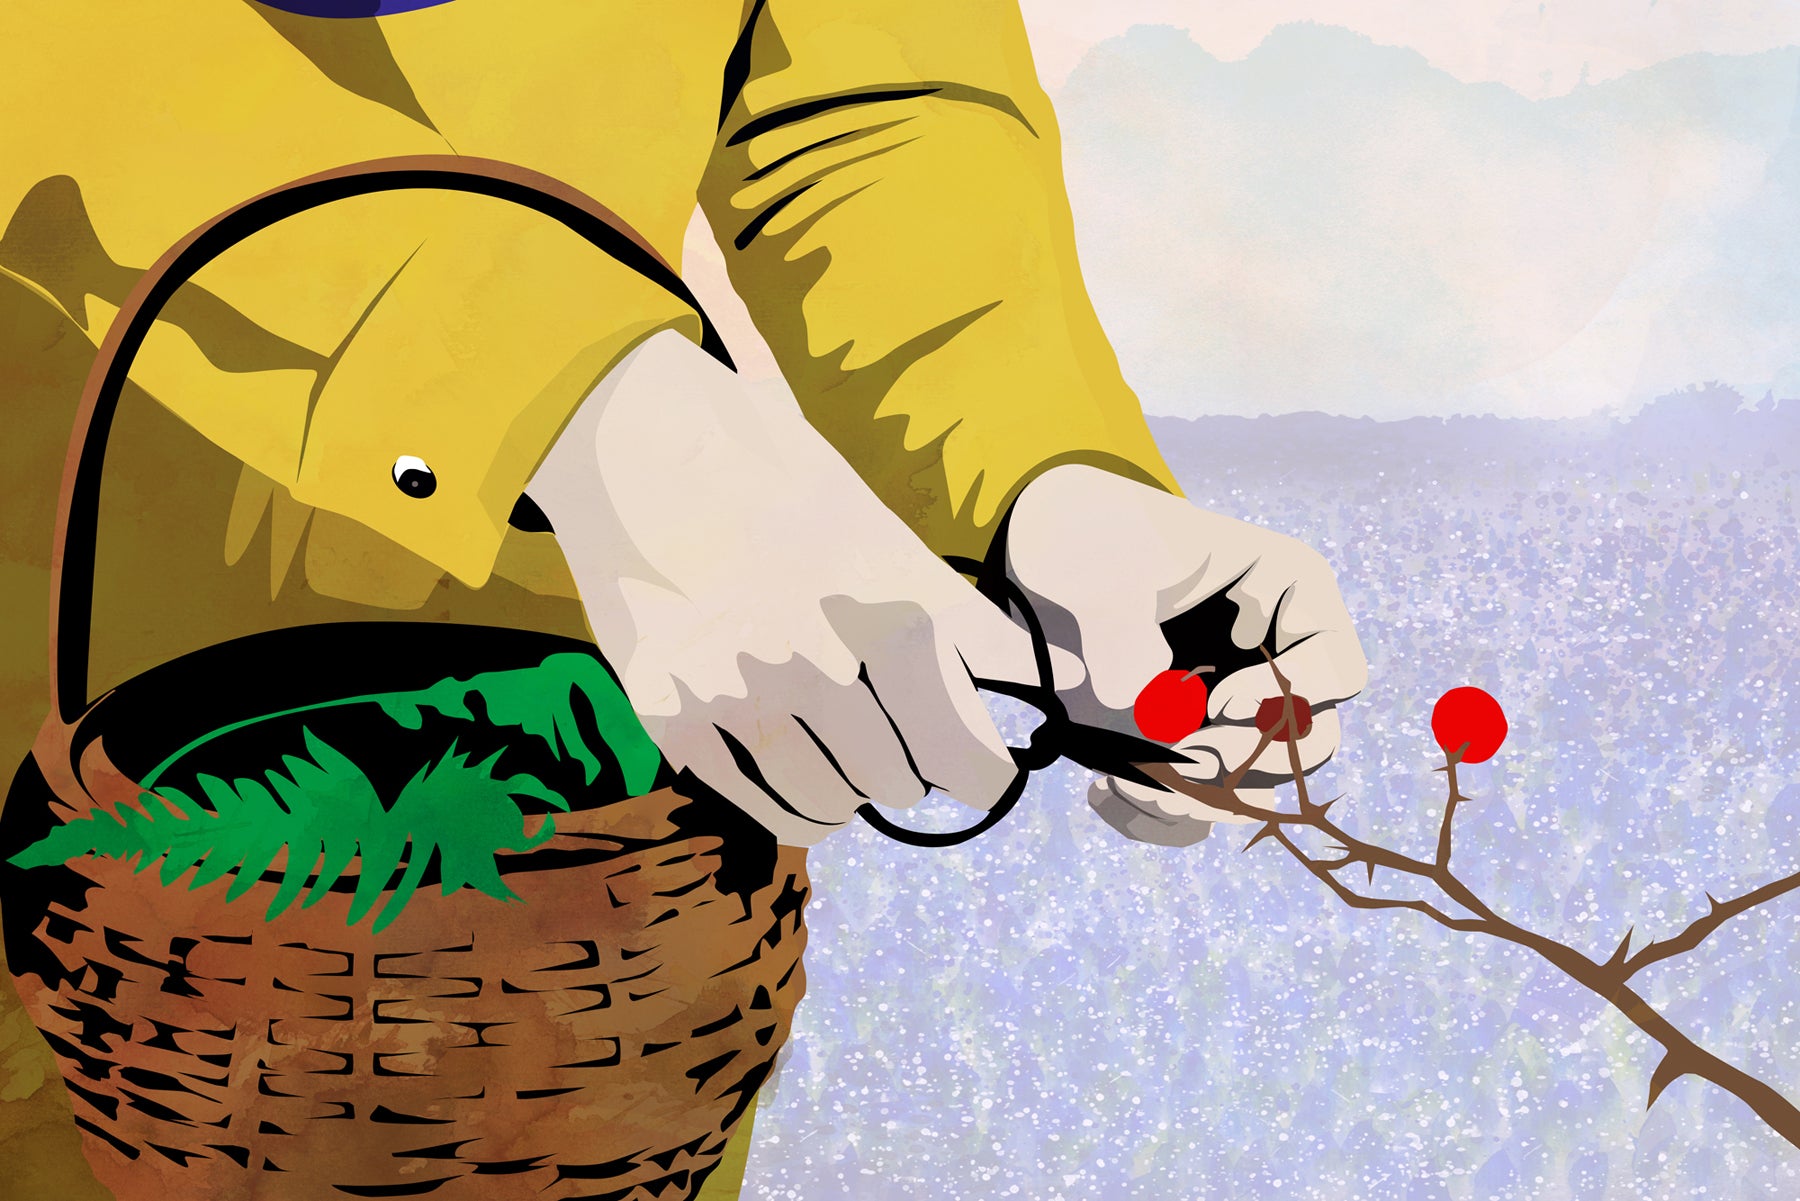 Illustration of a person's hands holding a basket and using scissors to harvest red berries.